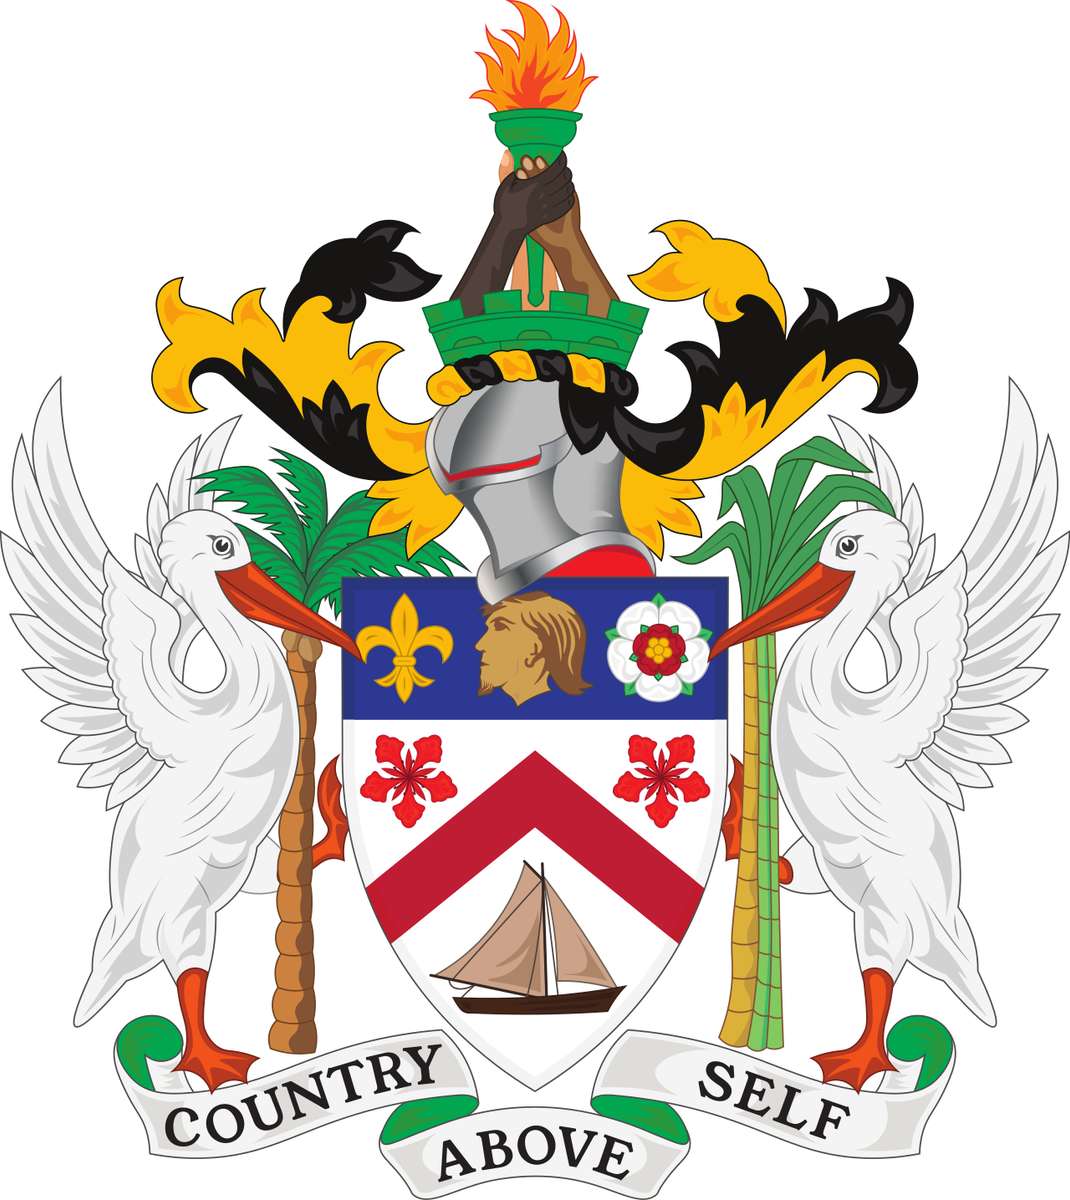 The Coat of Arms online puzzle